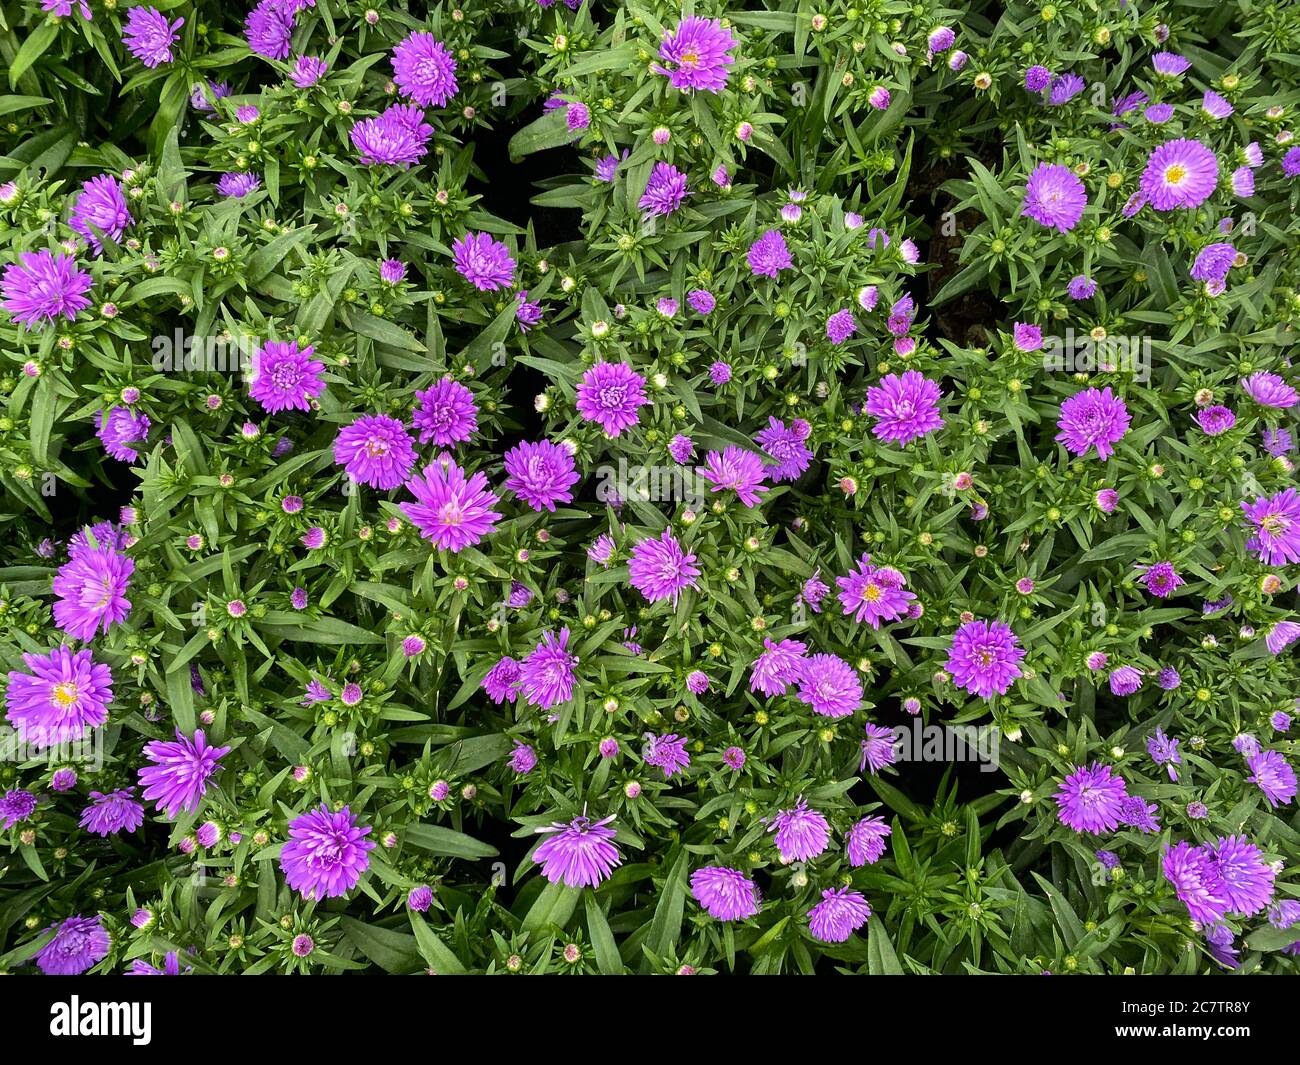 Top view on isolated purple bushy aster flowers (symphyotrichum dumosum victoria victori) with green leaves Stock Photo